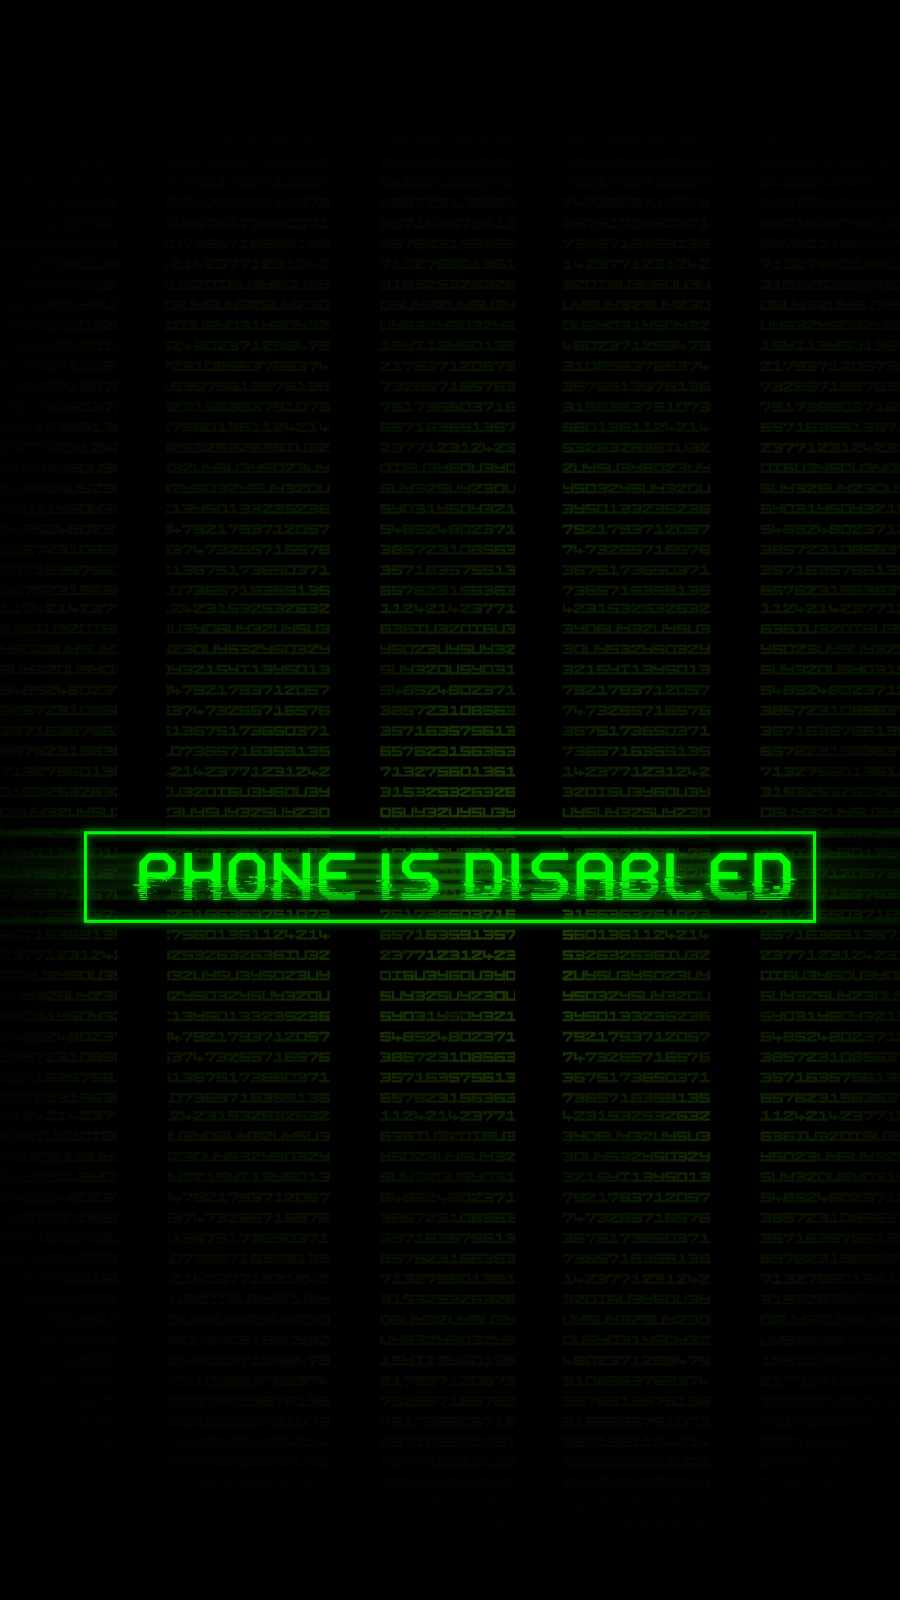 Phone is Disabled iPhone Wallpaper